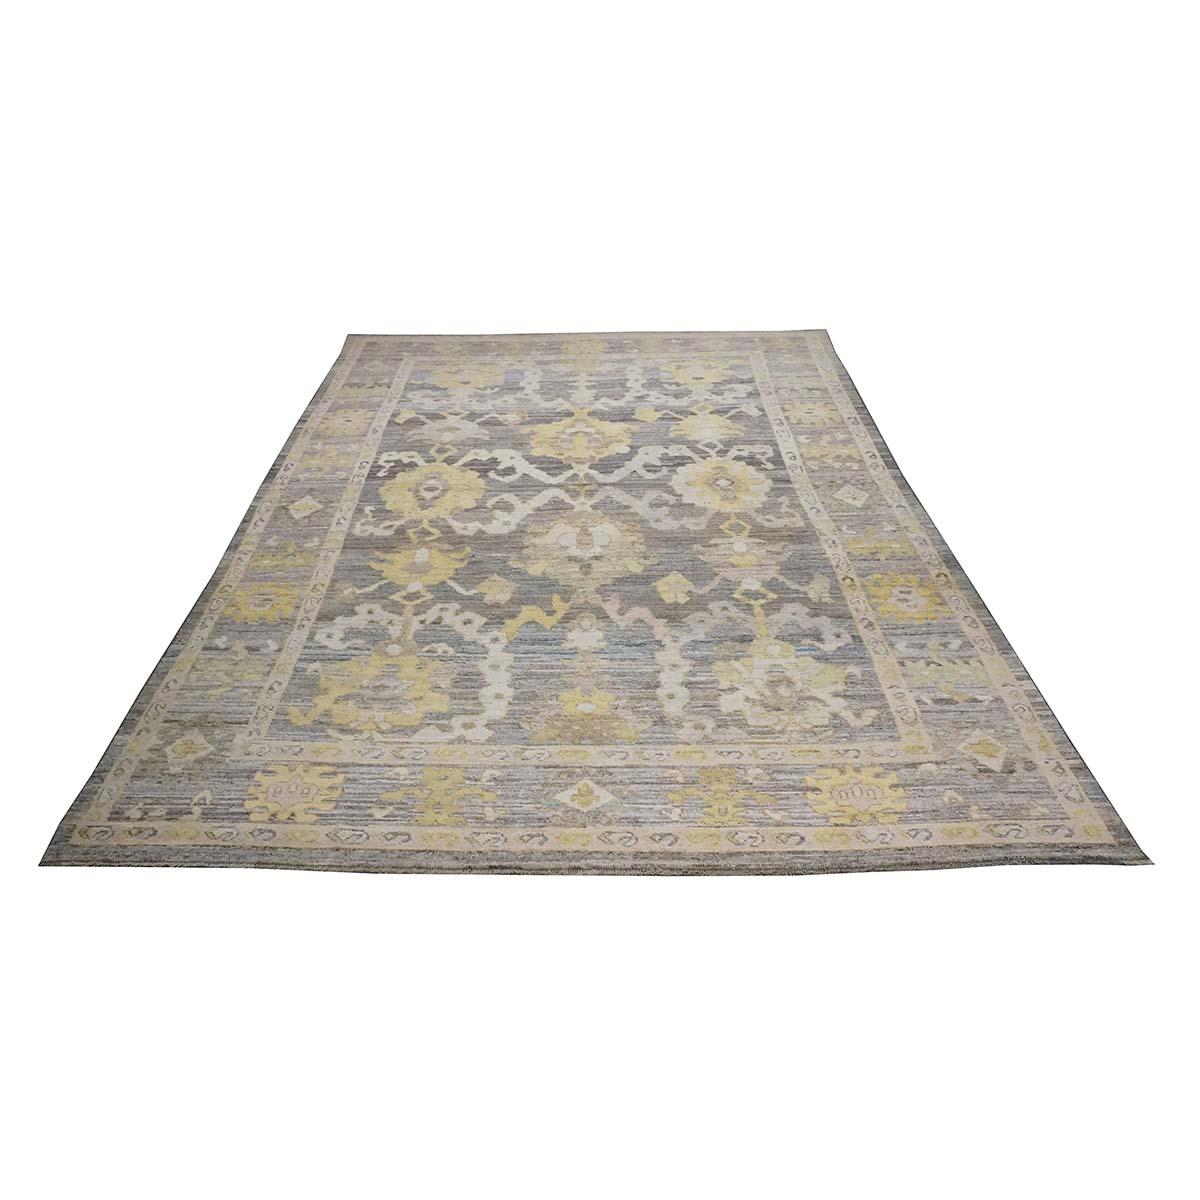 21st Century Turkish Oushak 9x14 Slate Blue, Olive Green, & Ivory Handmade Rug In Excellent Condition For Sale In Houston, TX